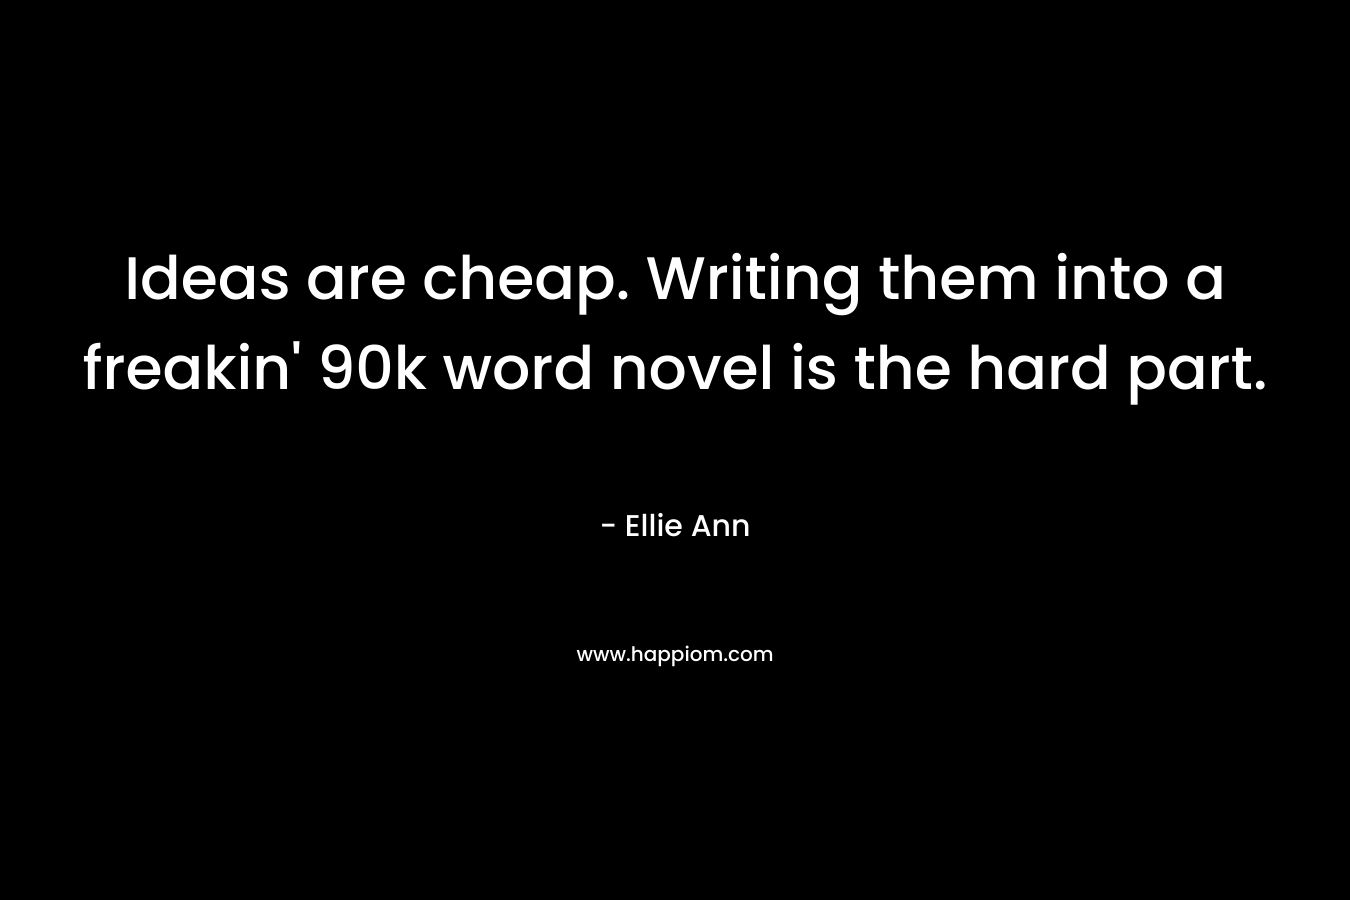 Ideas are cheap. Writing them into a freakin' 90k word novel is the hard part.